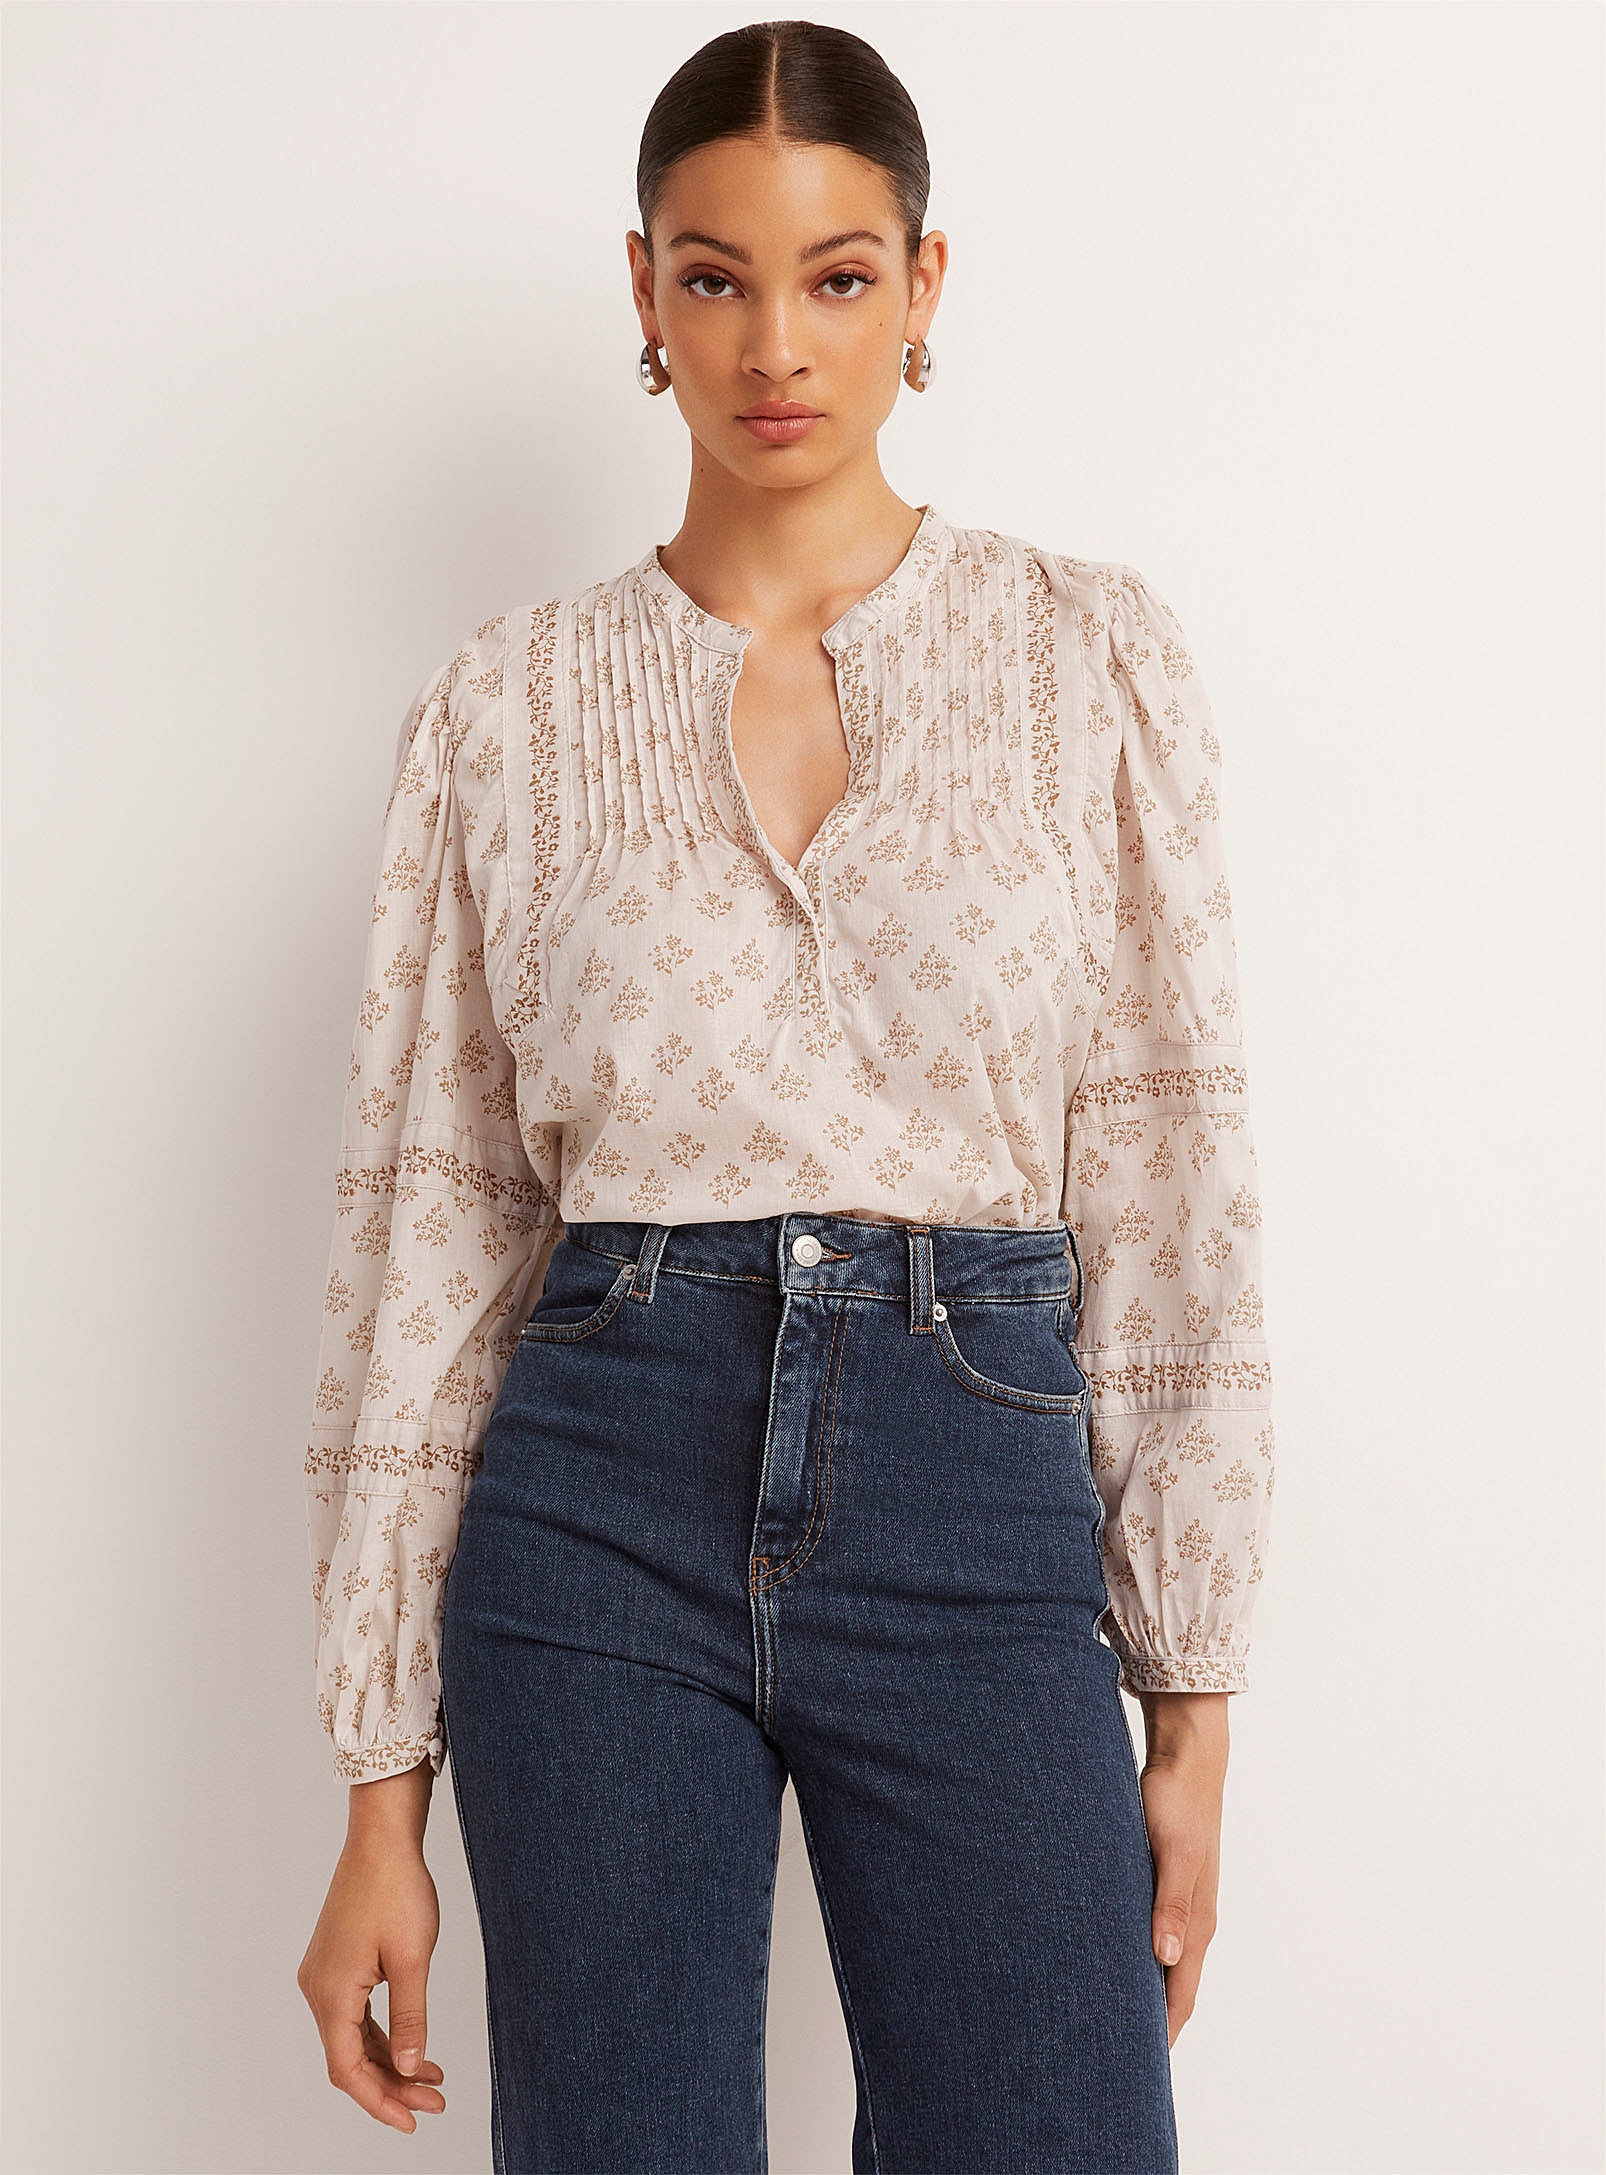 Icone Small Flowers Sheer Pleated Blouse In Patterned Ecru